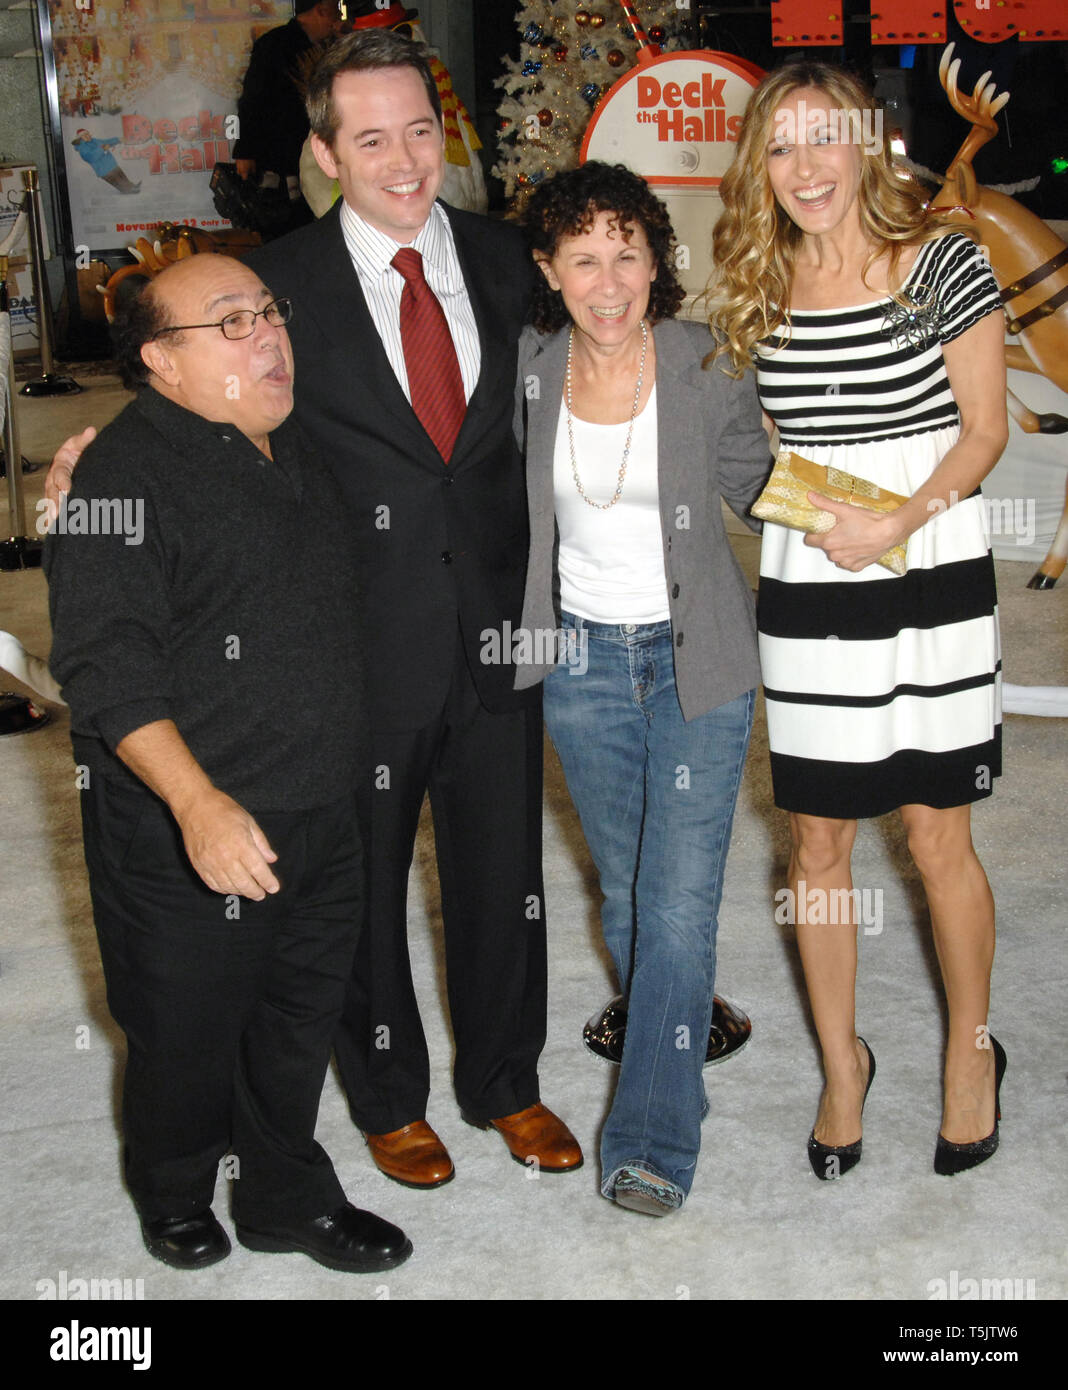 LOS ANGELES, CA. November 12, 2006: DANNY DEVITO (left), MATTHEW BRODERICK, RHEA PERLMAN & SARAH JESSICA PARKER at the world premiere of their new movie 'Deck the Halls' at Grauman's Chinese Theatre, Hollywood. Picture: Paul Smith / Featureflash Stock Photo